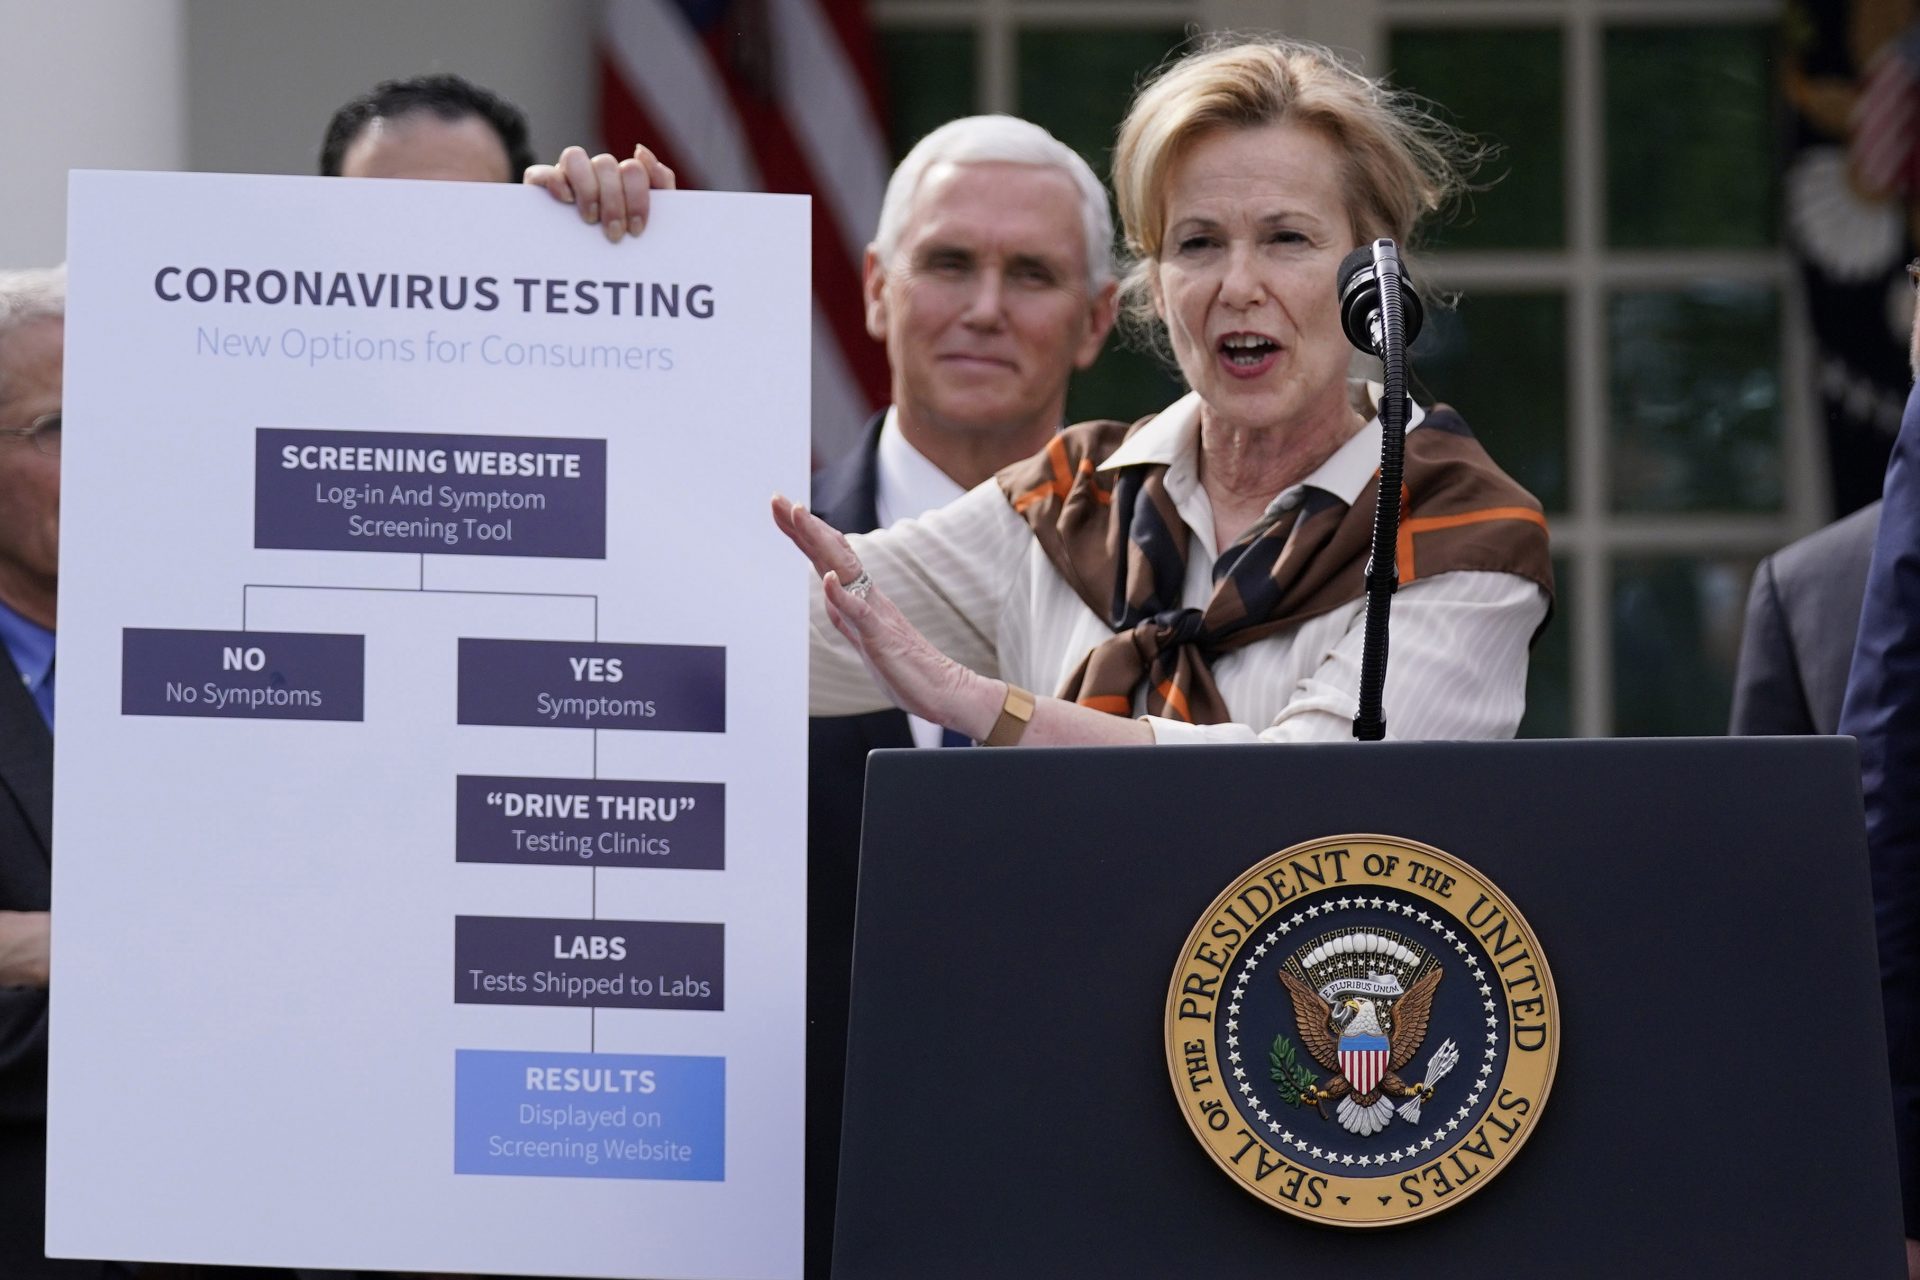 In this March 13, 2020, file photo Dr. Deborah Birx, White House coronavirus response coordinator, speaks during a news conference about the coronavirus in the Rose Garden of the White House in Washington.